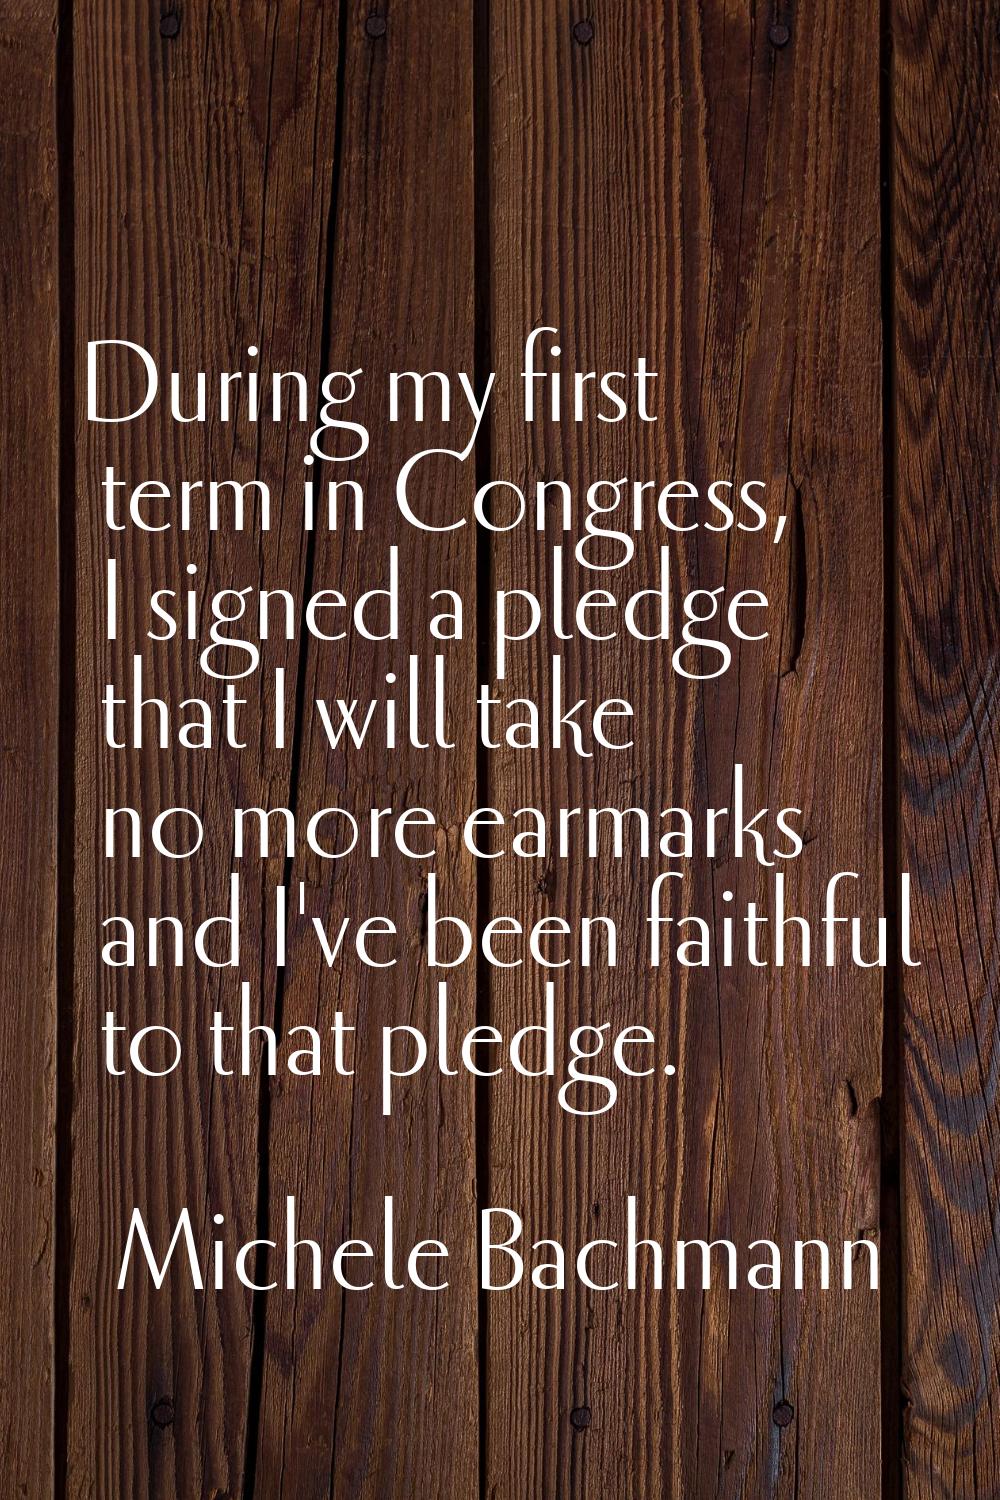 During my first term in Congress, I signed a pledge that I will take no more earmarks and I've been